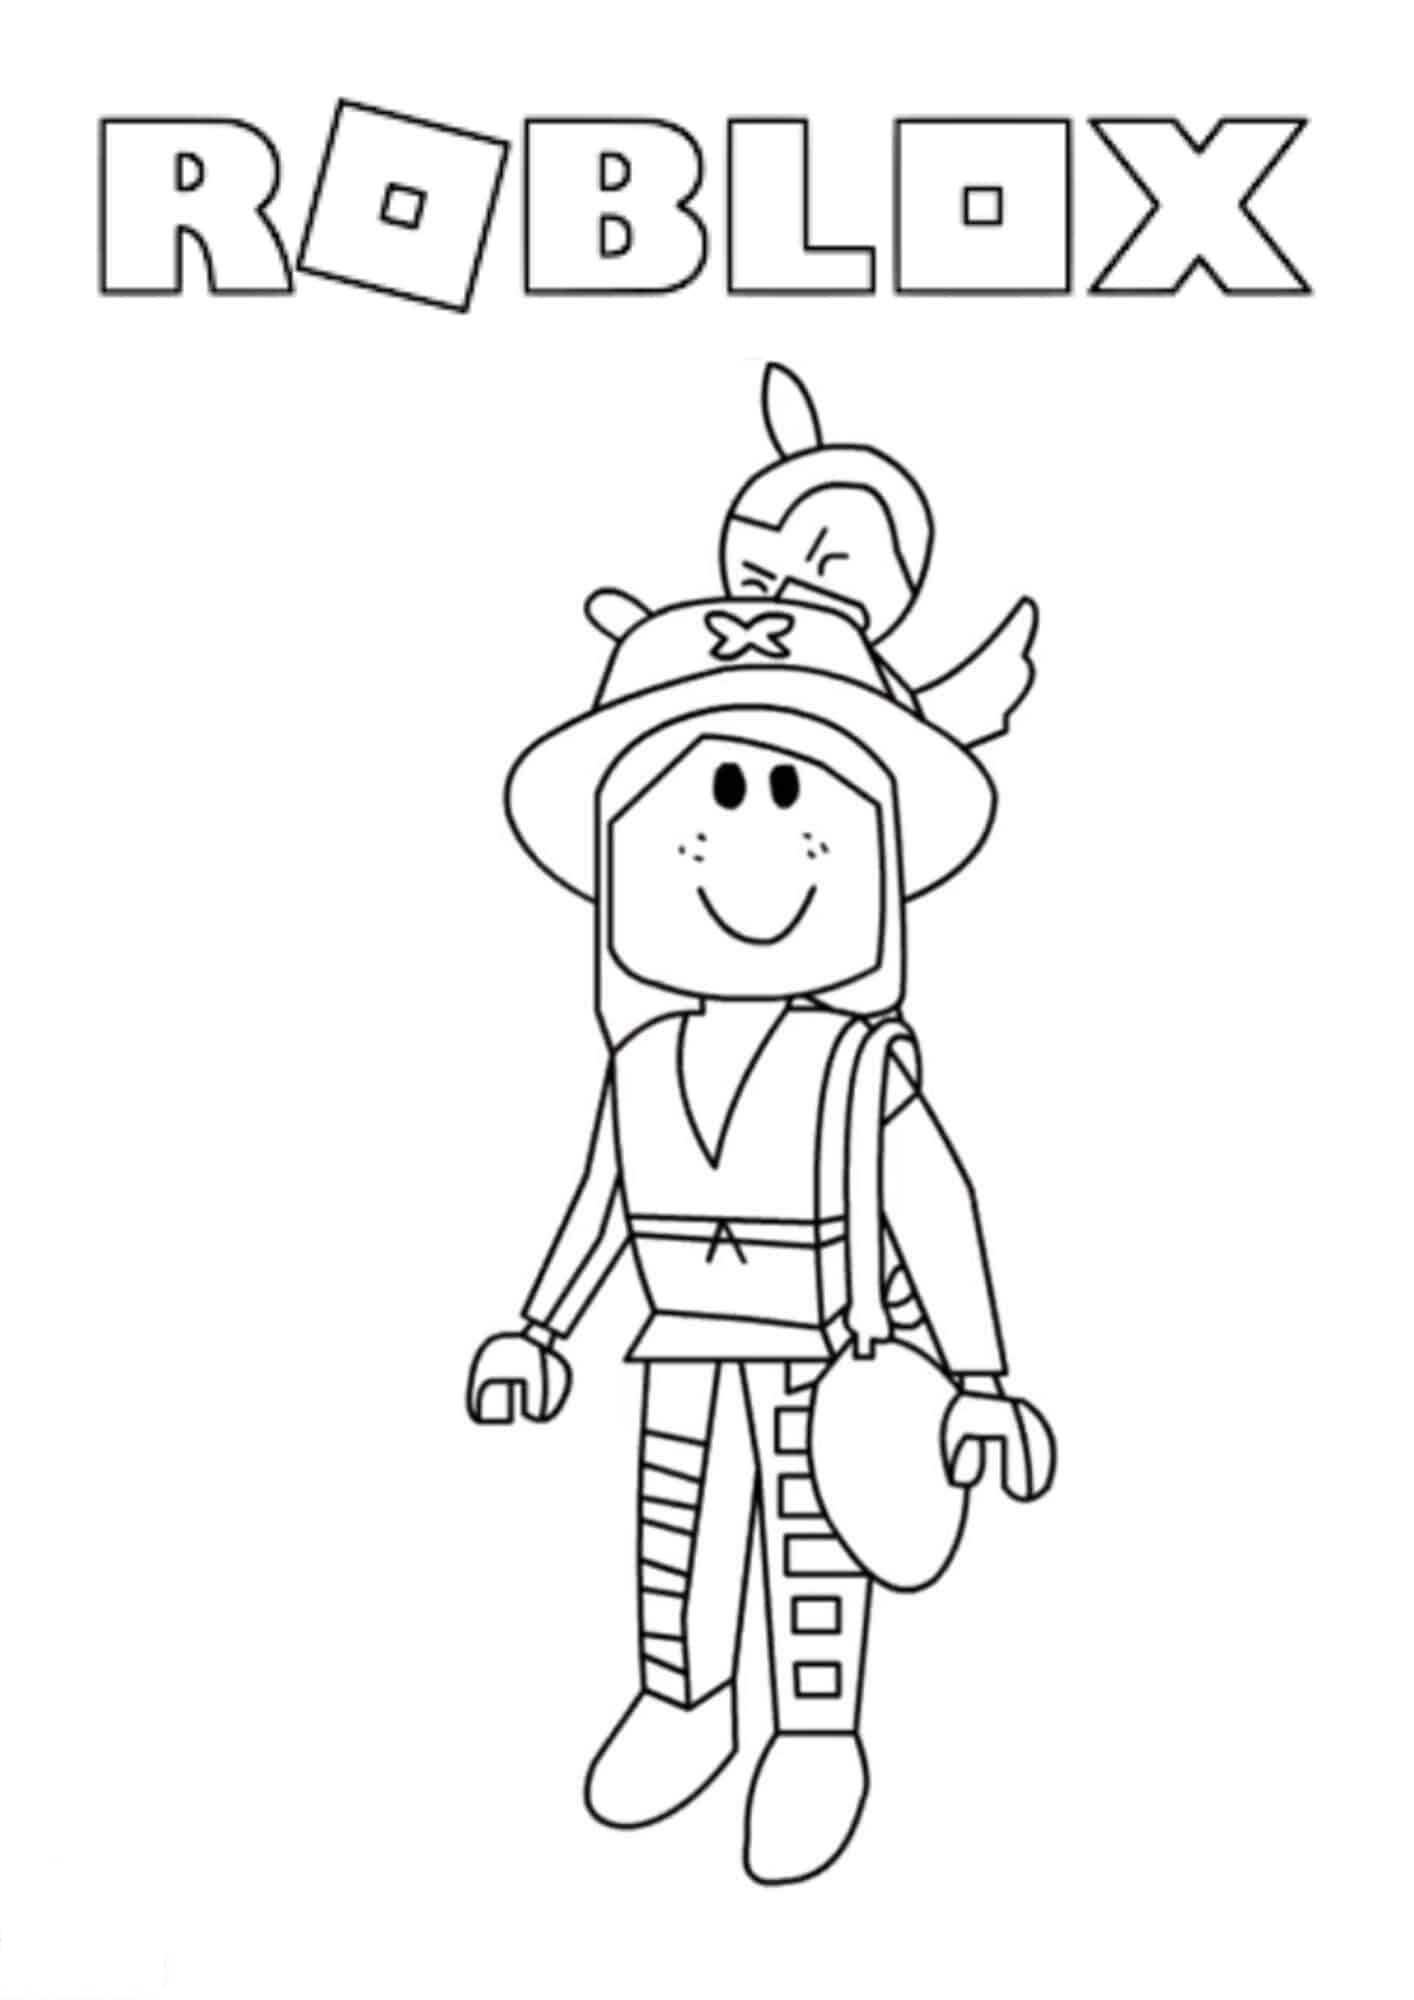 Roblox girl brings her hand bag Coloring Page